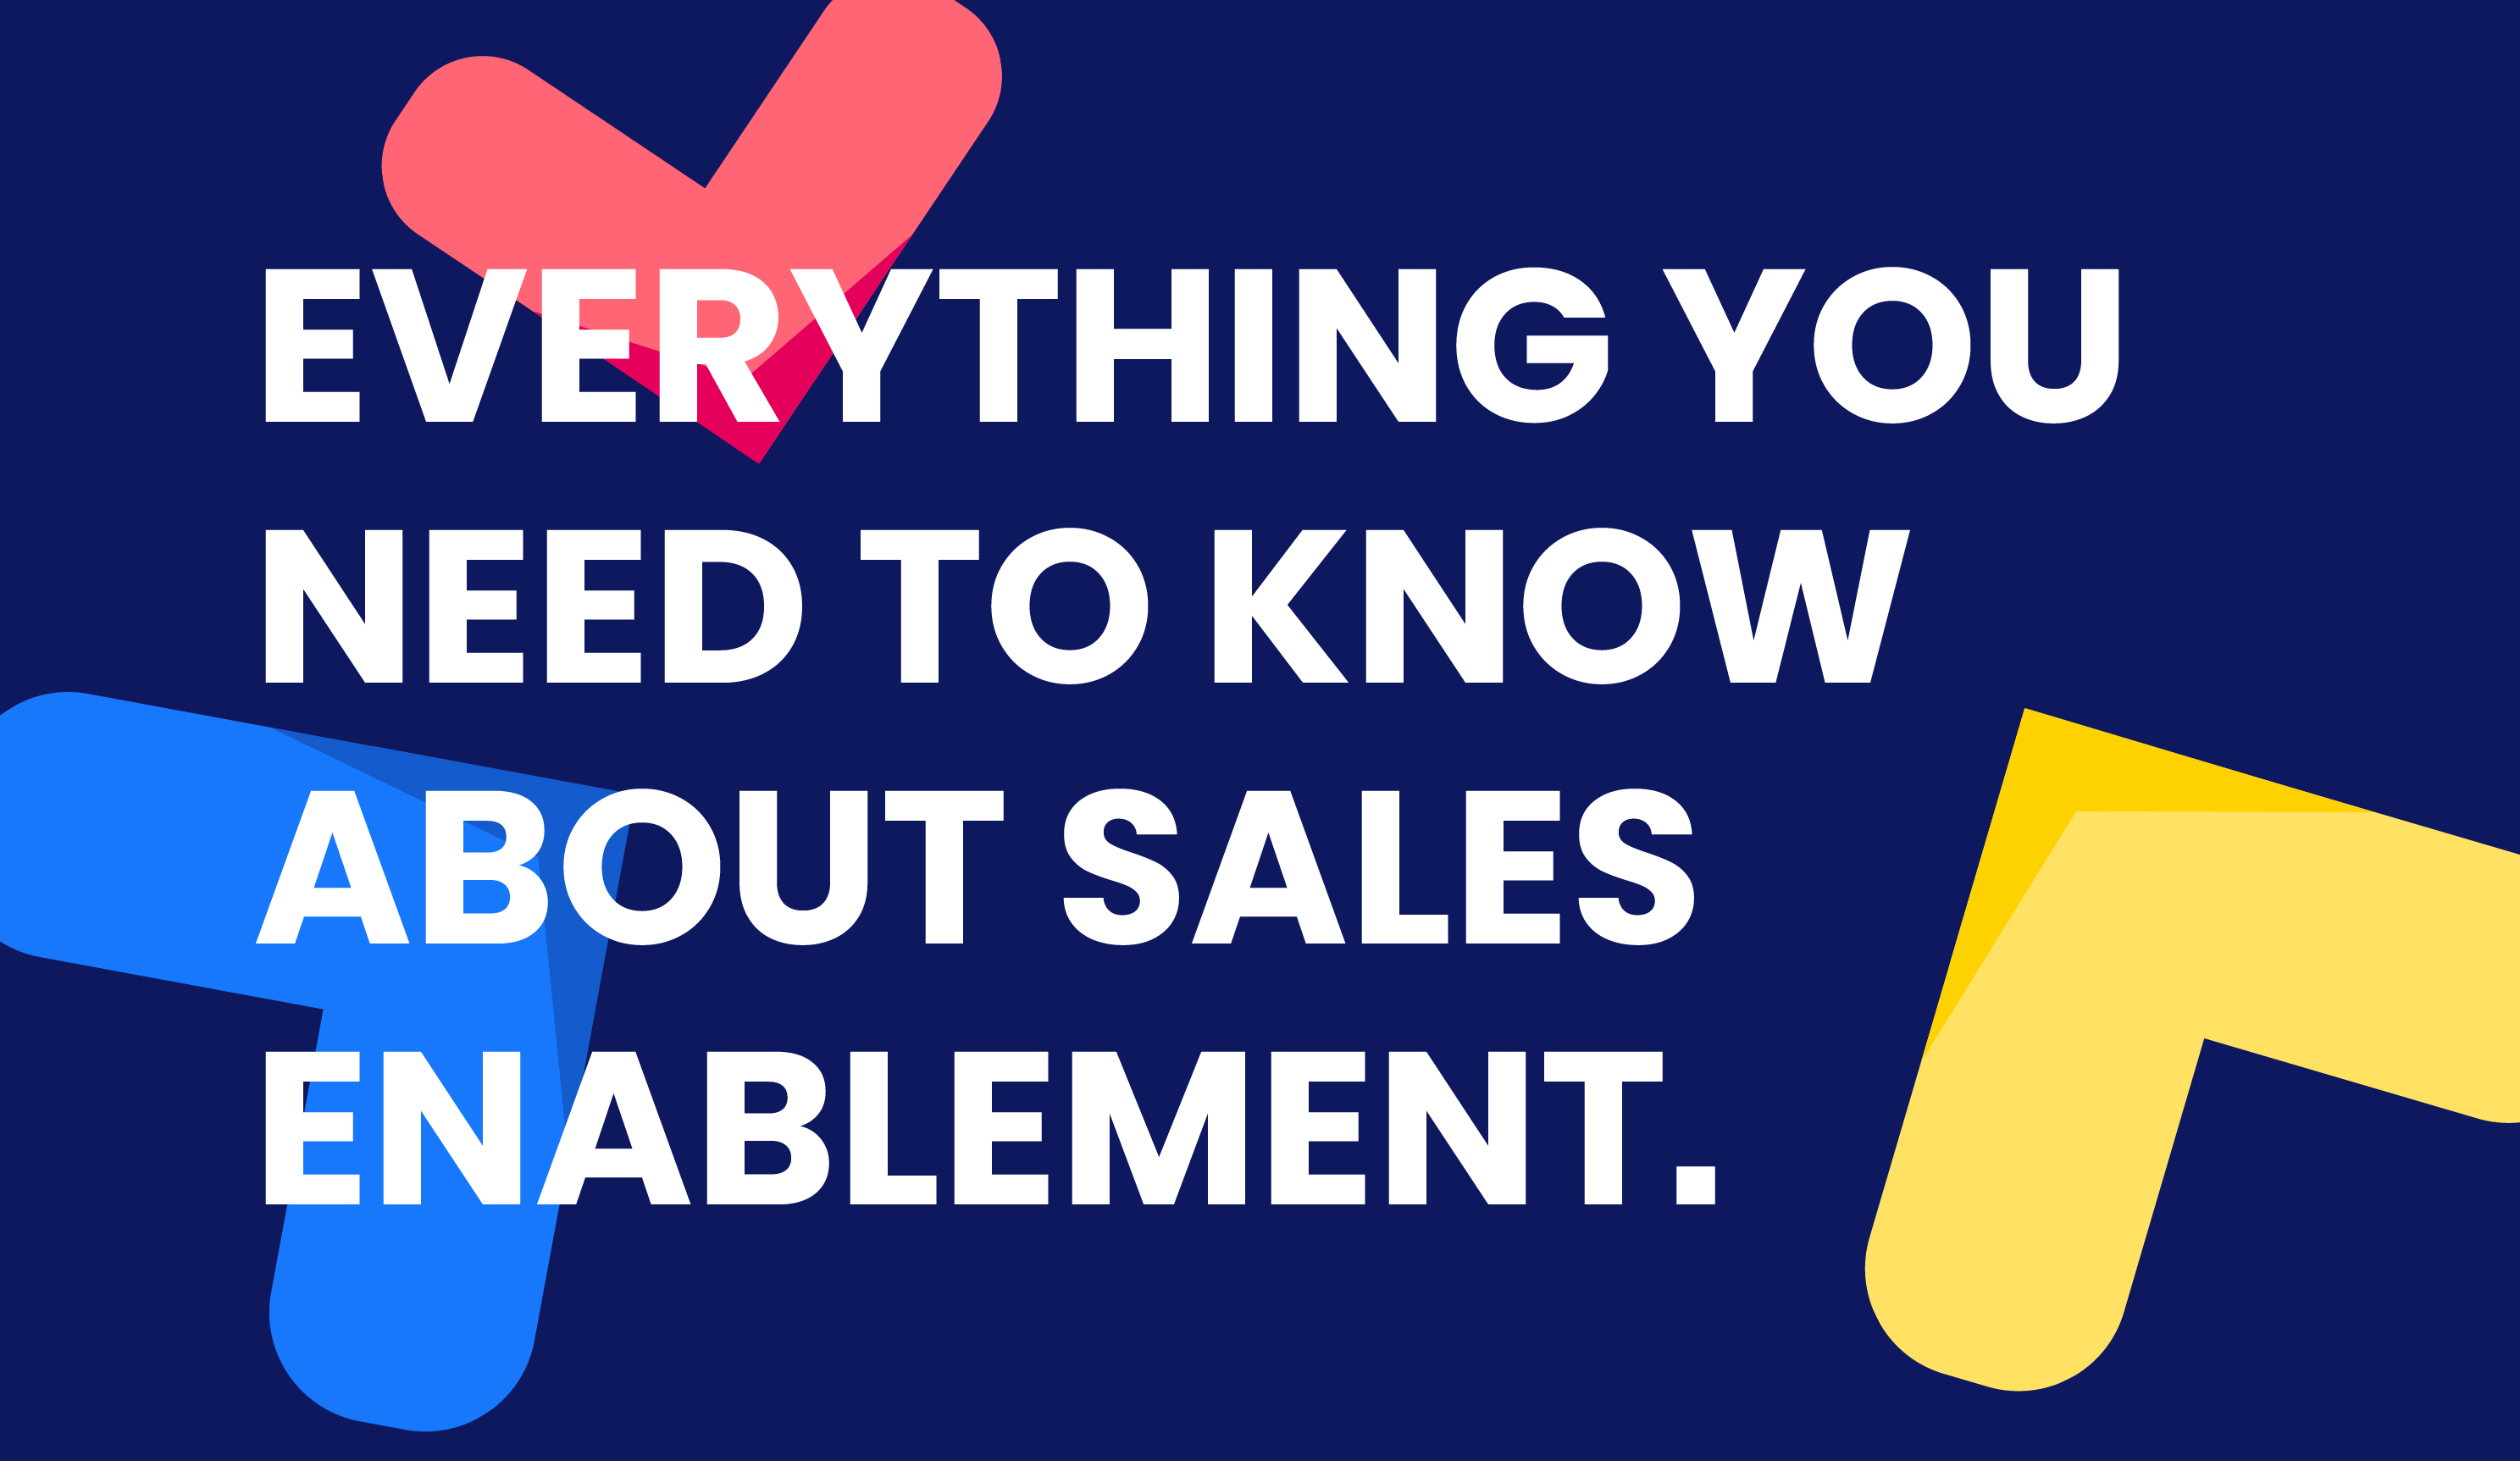 Everything You Need to Know About Sales Enablement